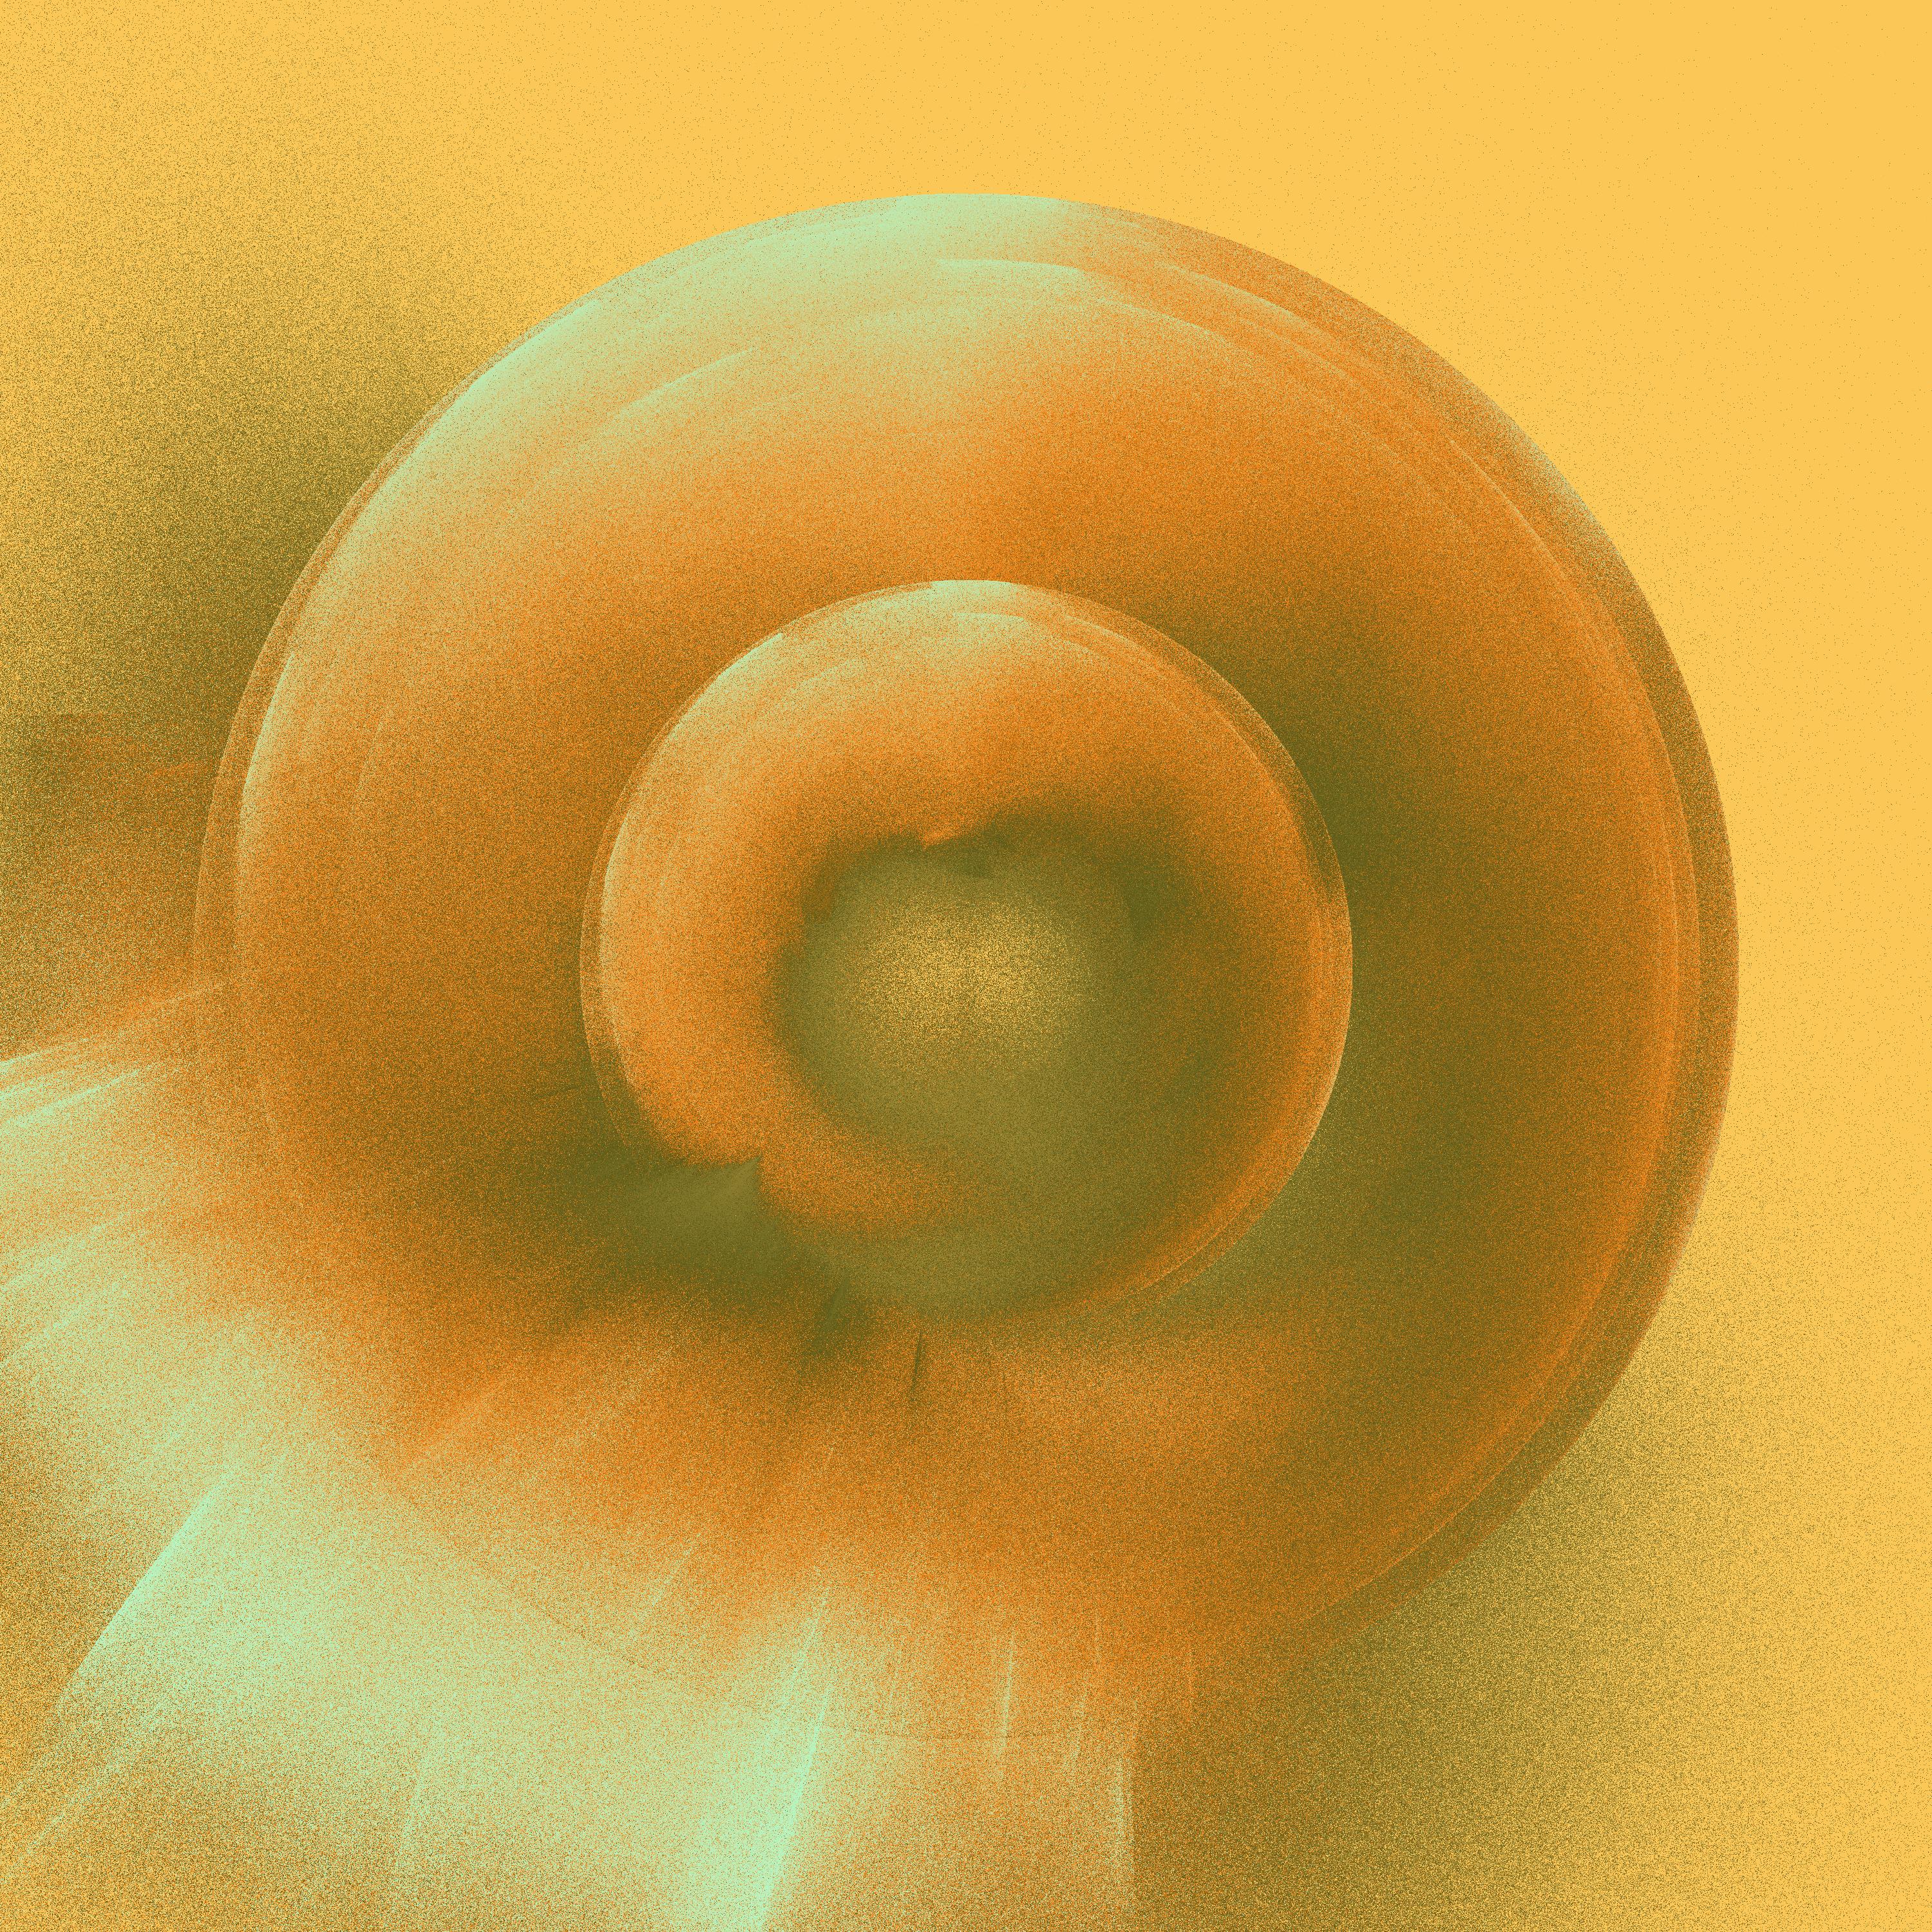 concentric circular noise patterns shonw in orange and brown against a pale tan background, with busts of noise in the lower-left corner